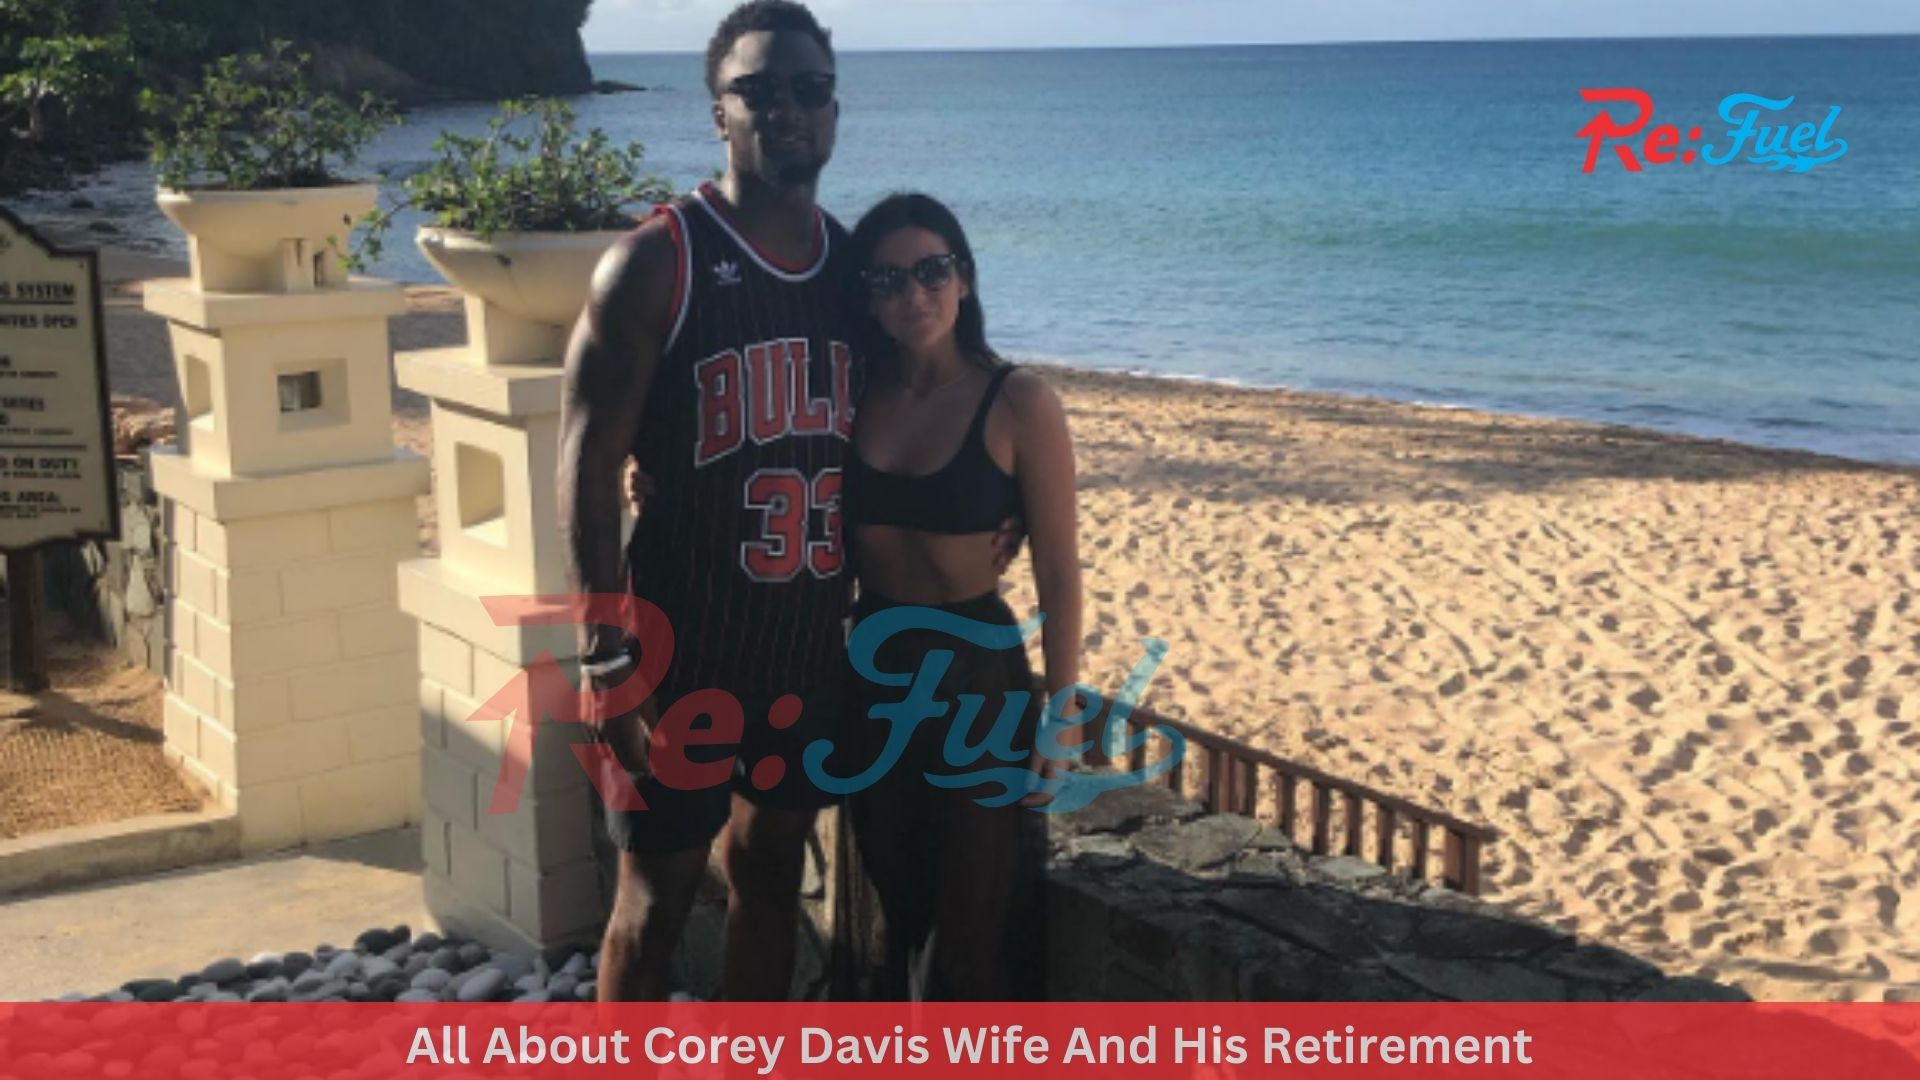 All About Corey Davis Wife And His Retirement